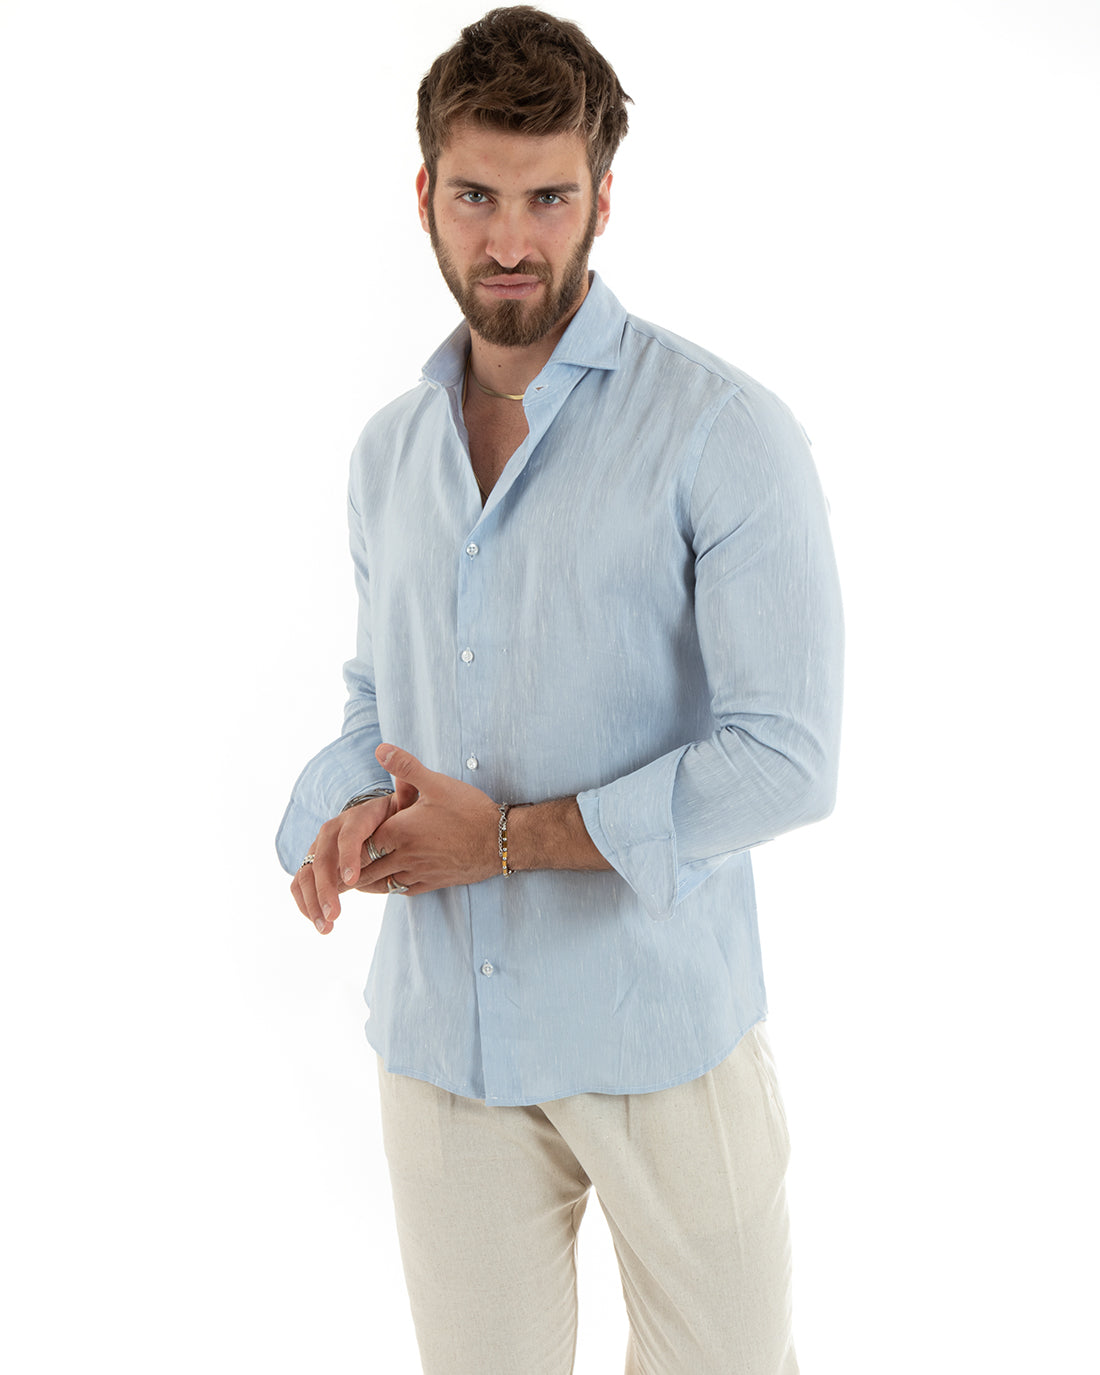 Men's Shirt With French Collar Long Sleeves Tailored Melange Linen Light Blue GIOSAL-C2686A